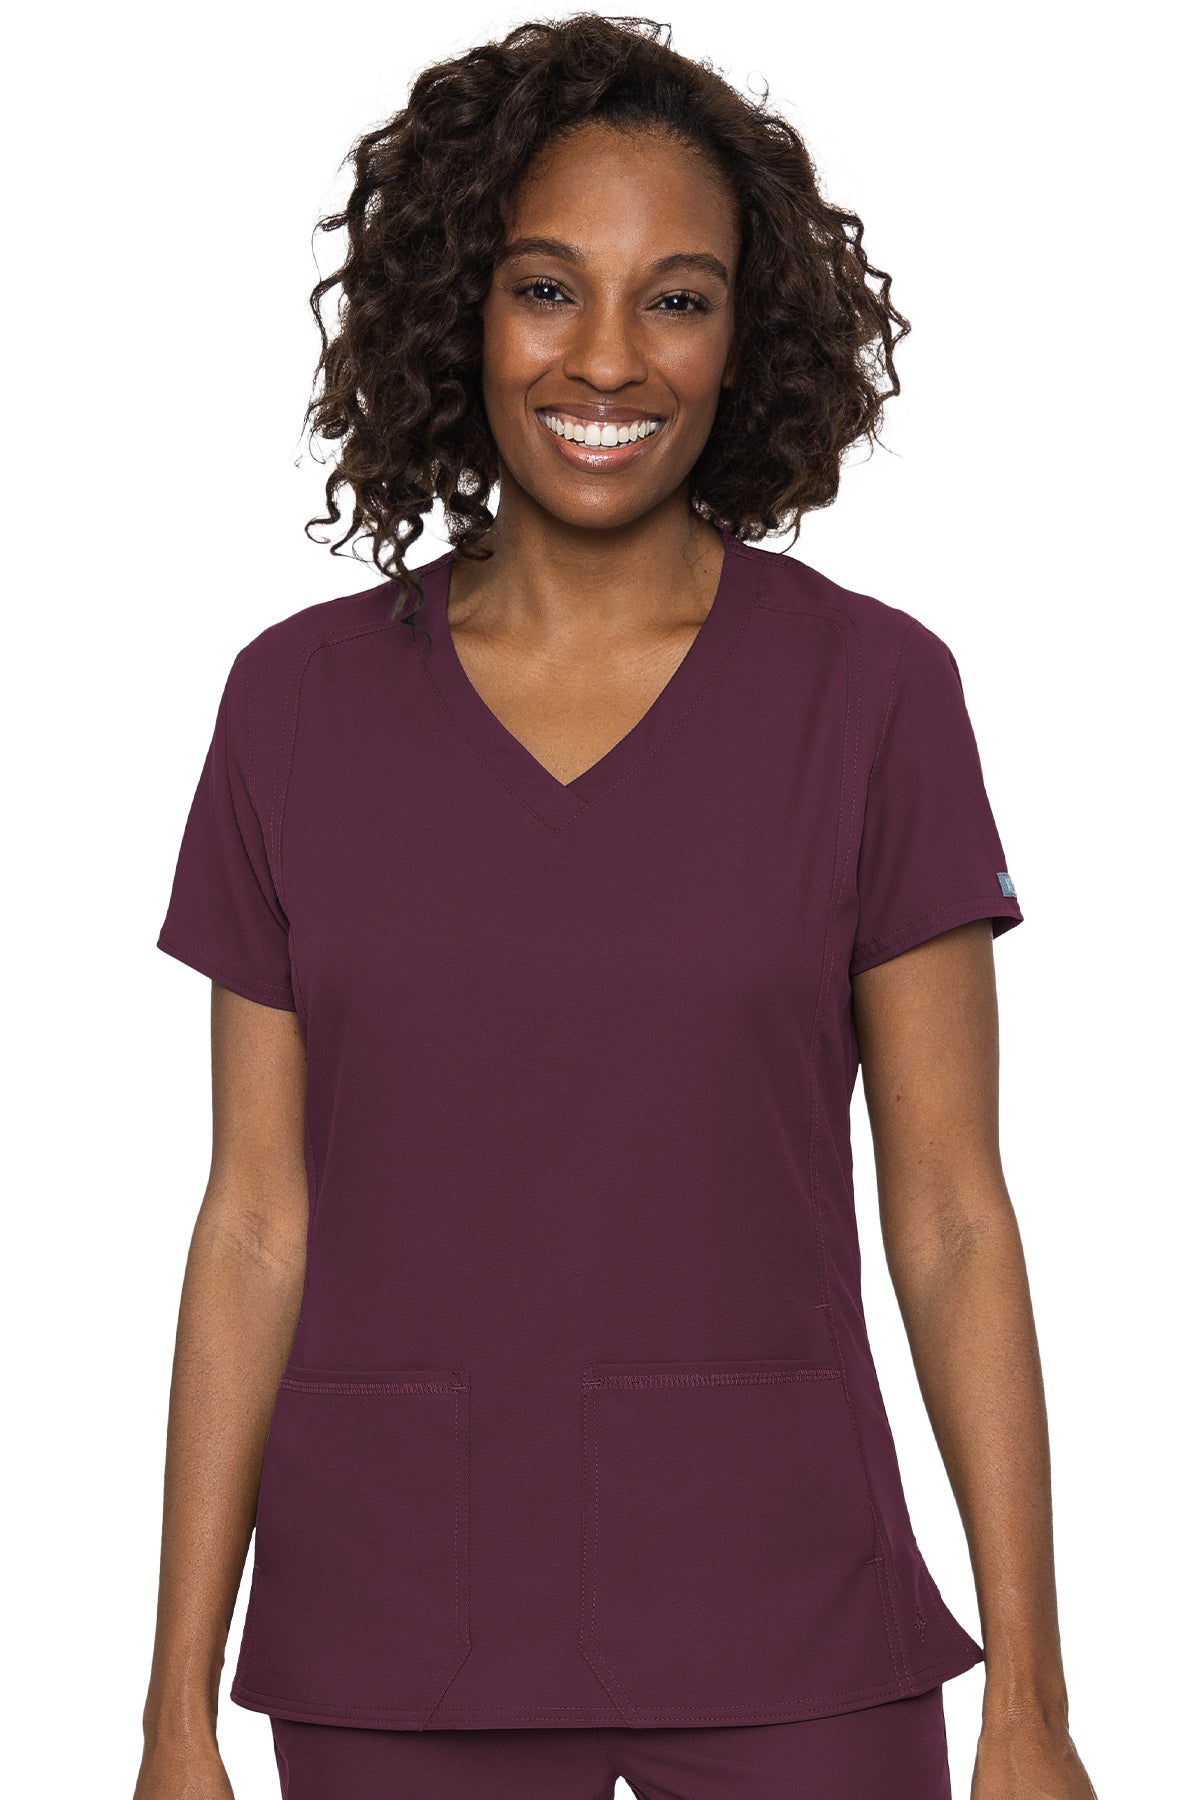 Med Couture Scrub Top Insight Classic V-Neck Side Pocket in Wine at Parker's Clothing and Shoes.